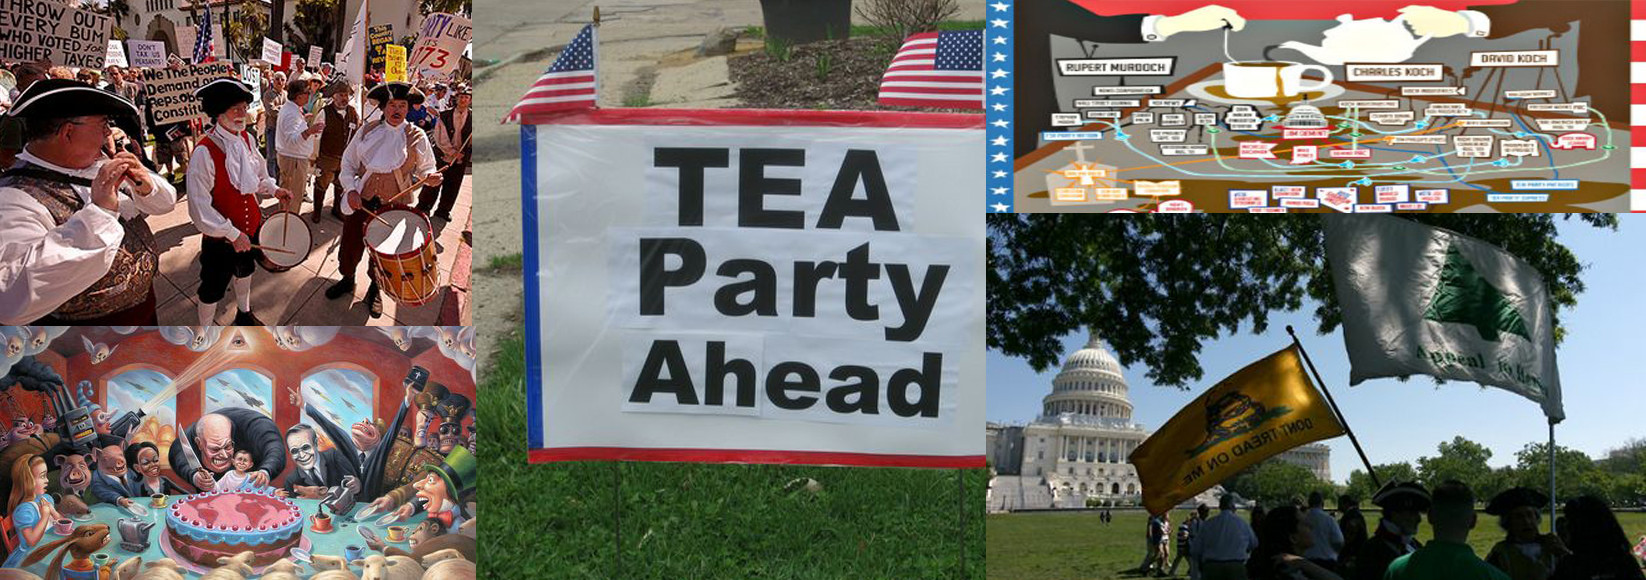 Tea Party Ideas Political
 “Beat the snot out of the Tea Party ” That’s the